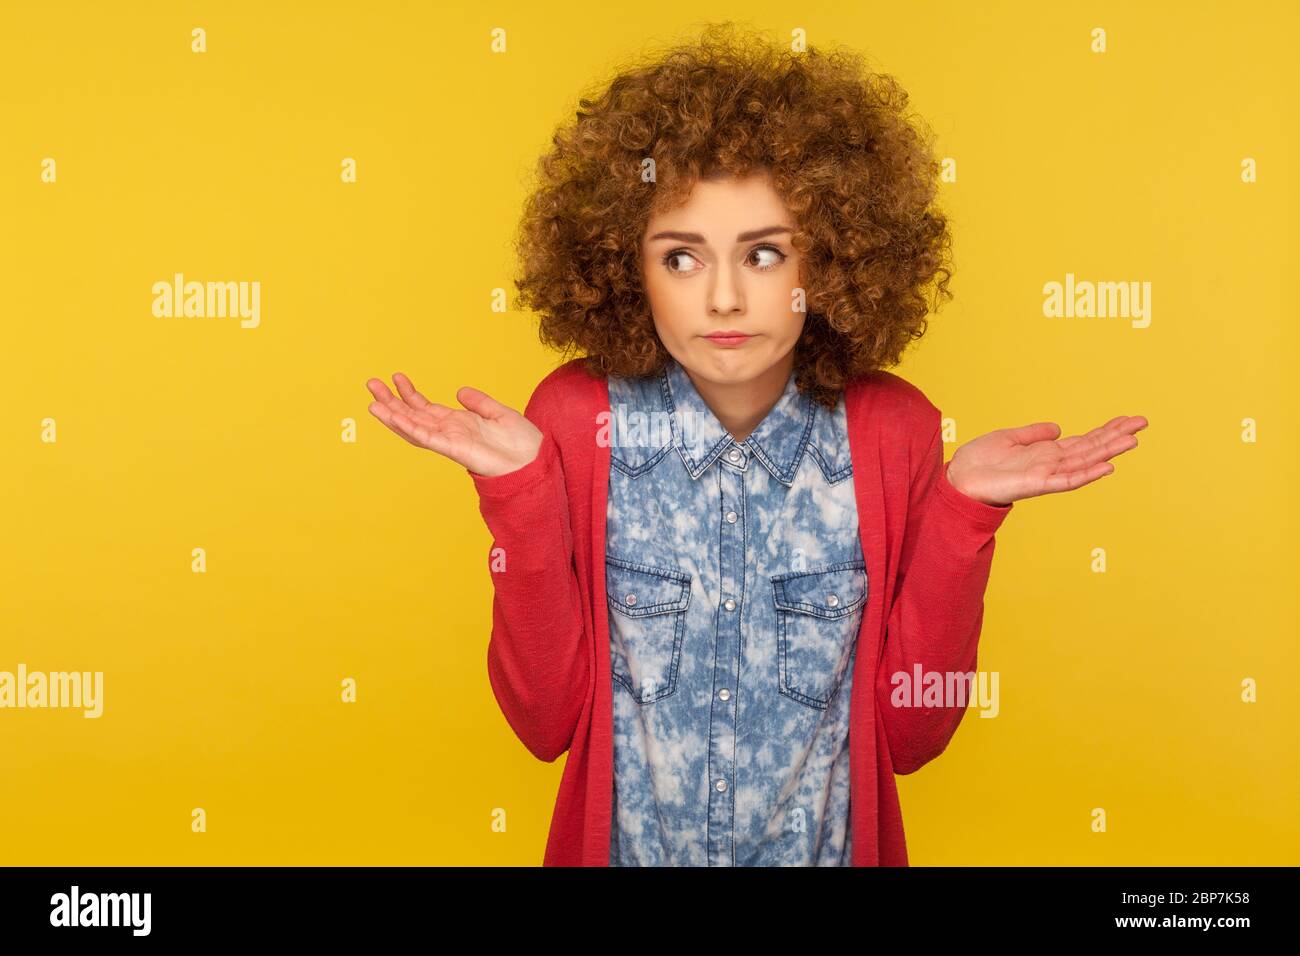 Don't know, maybe. Portrait of clueless uncertain confused woman with fluffy curly hair raising hands in hesitations, doubting and thinking careless, Stock Photo